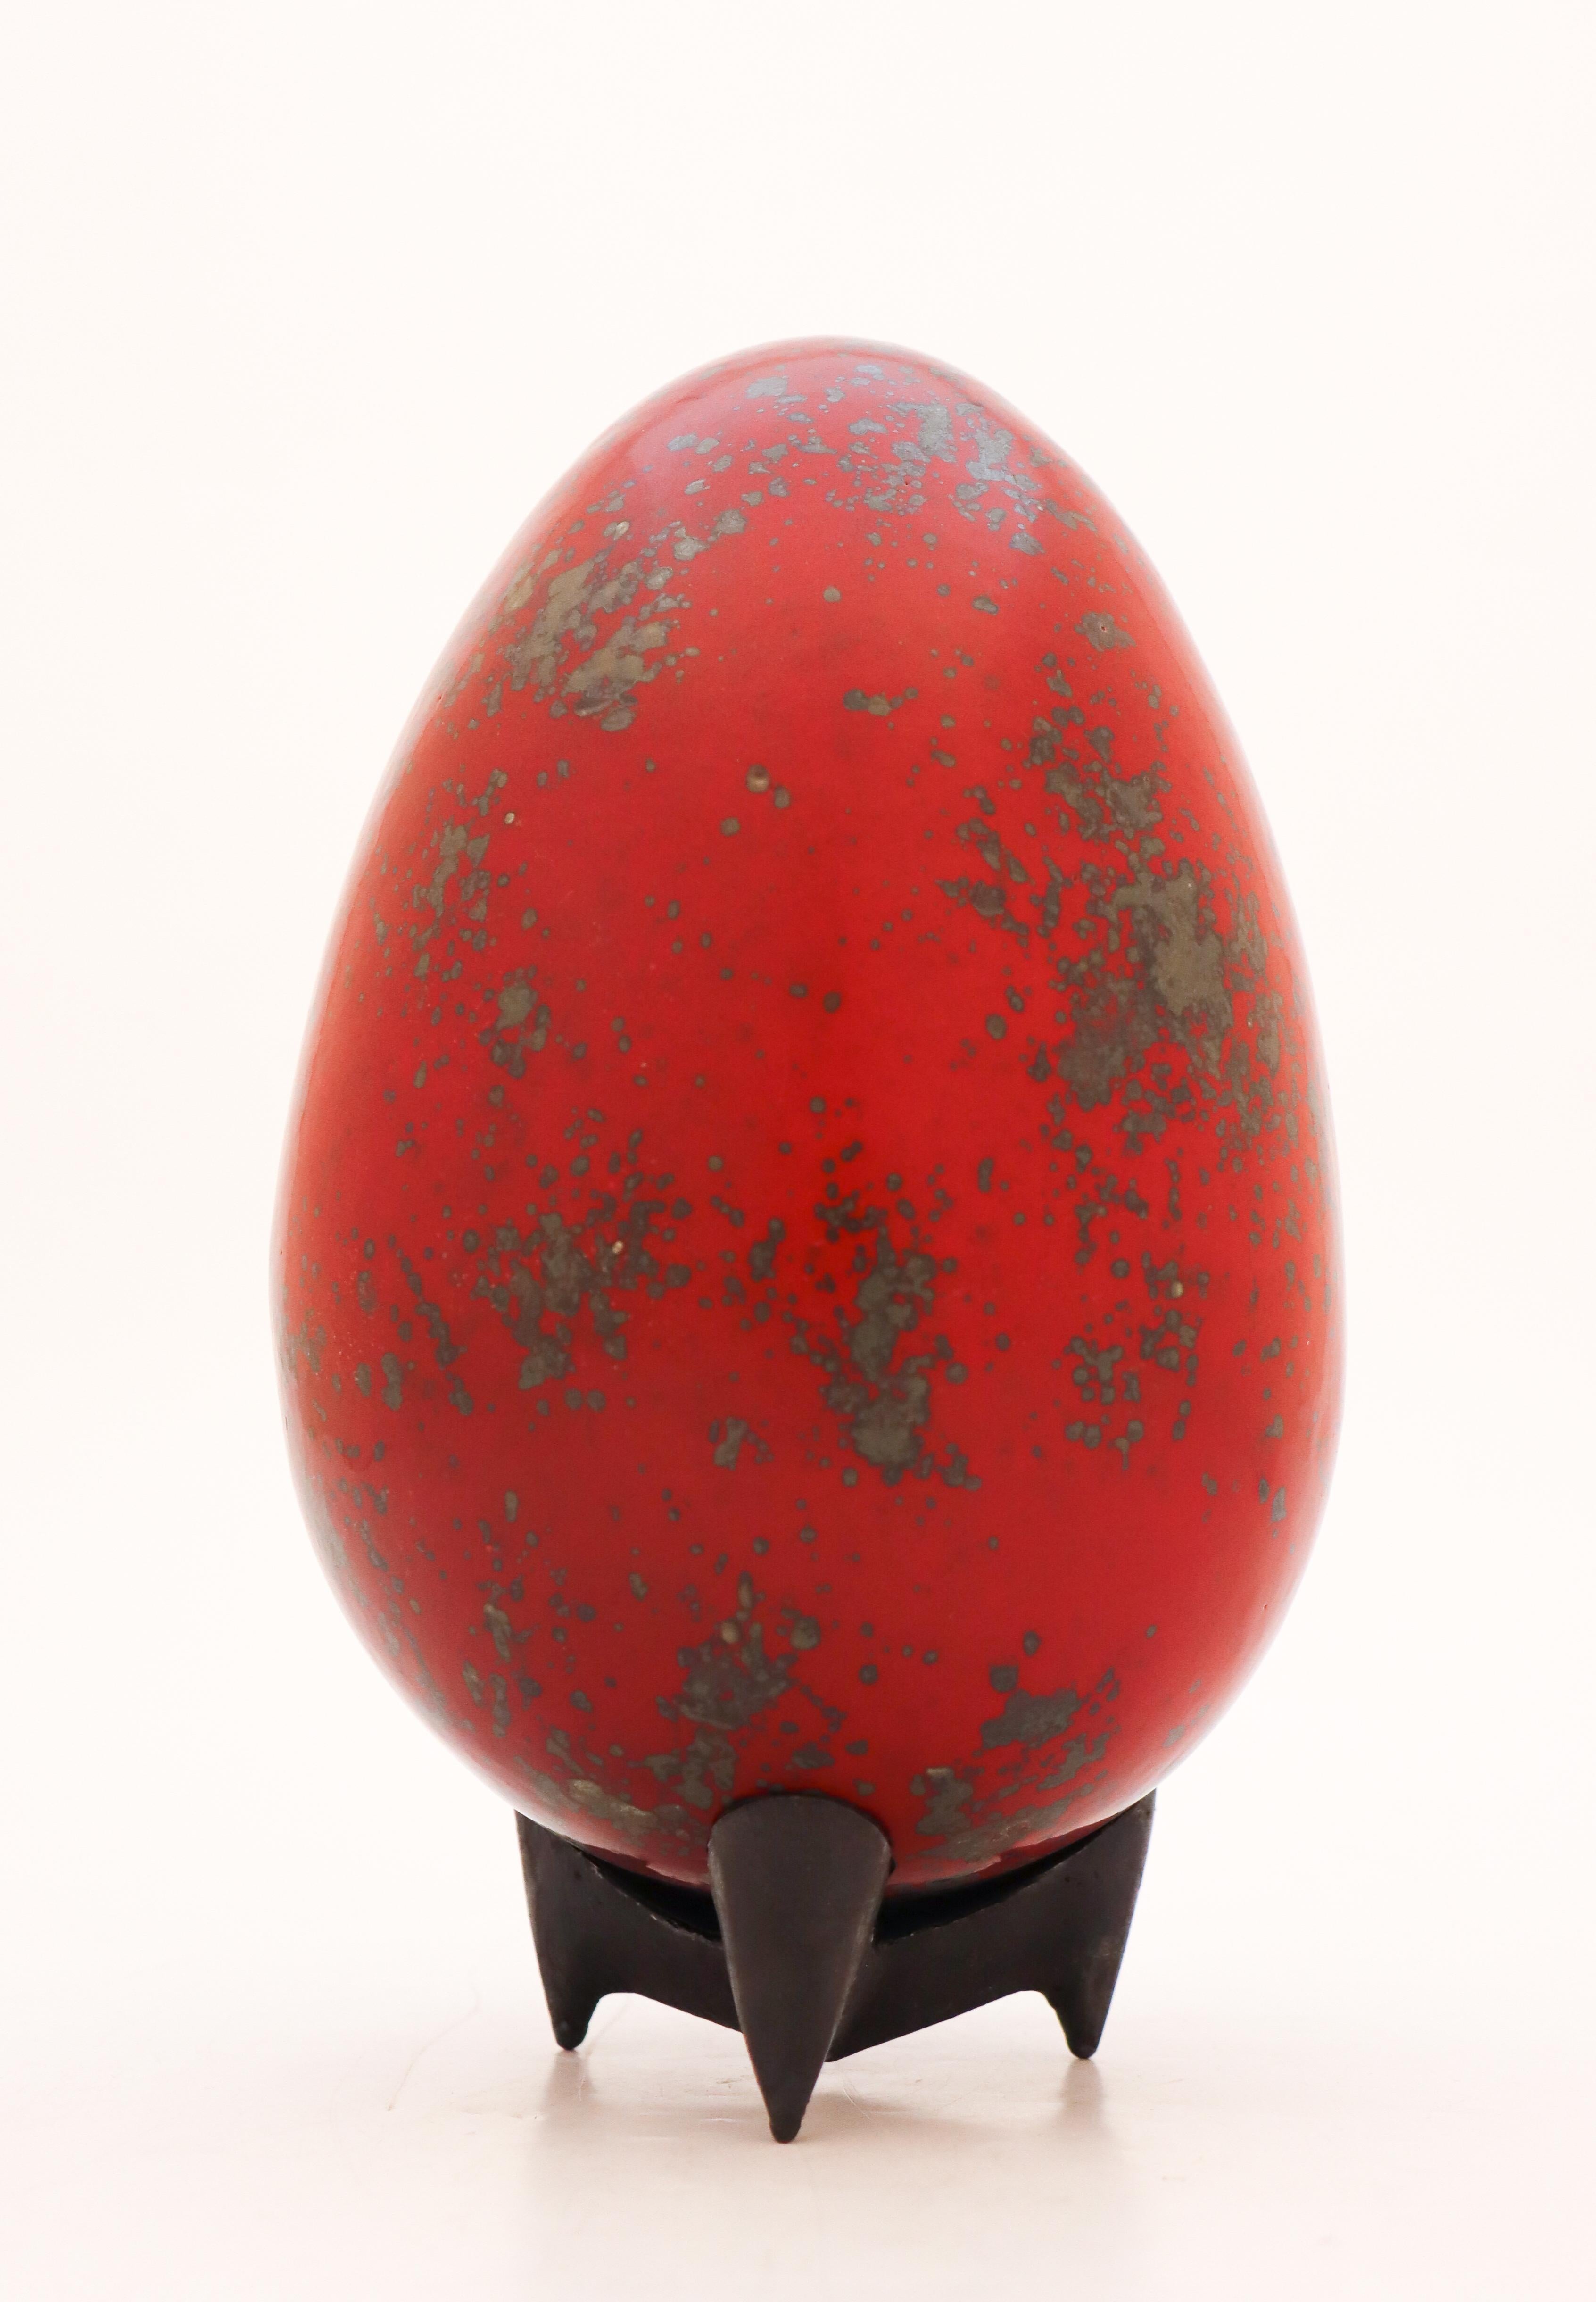 Egg designed by the Swedish ceramicist Hans Hedberg, who lived and worked in Biot, France. This egg is 25 cm (10